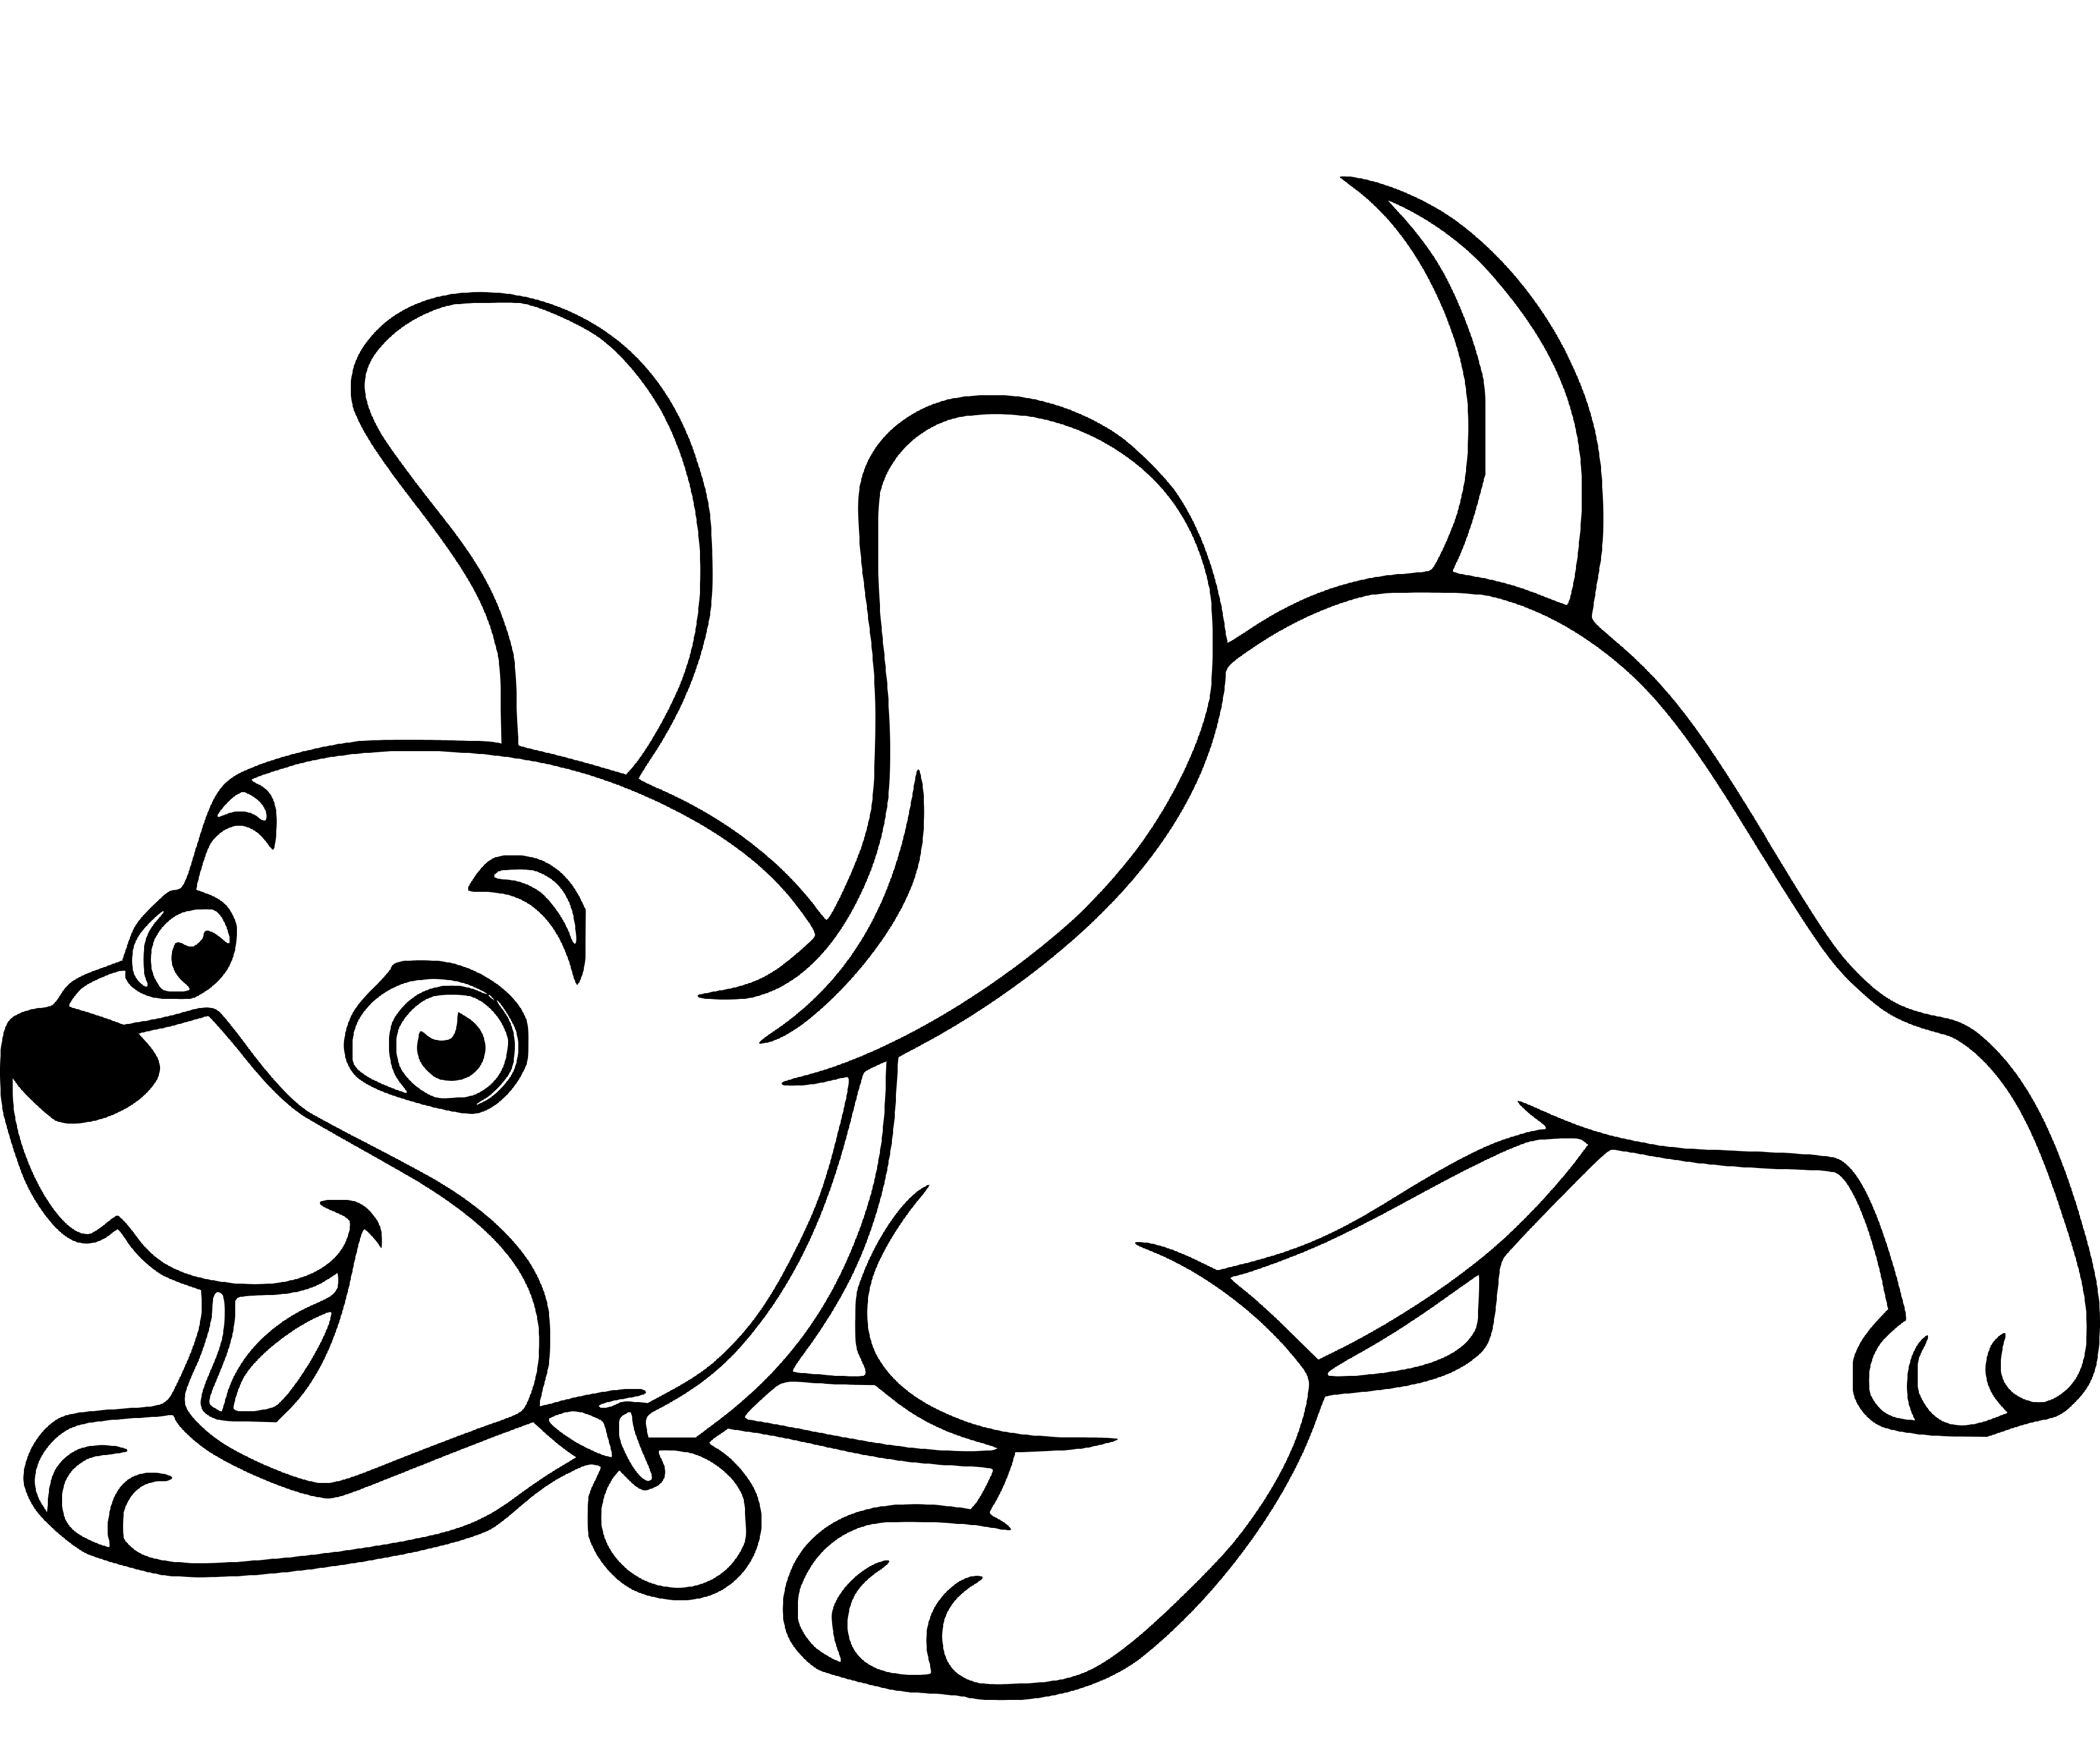 Puppy Coloring Page for kids - SheetalColor.com